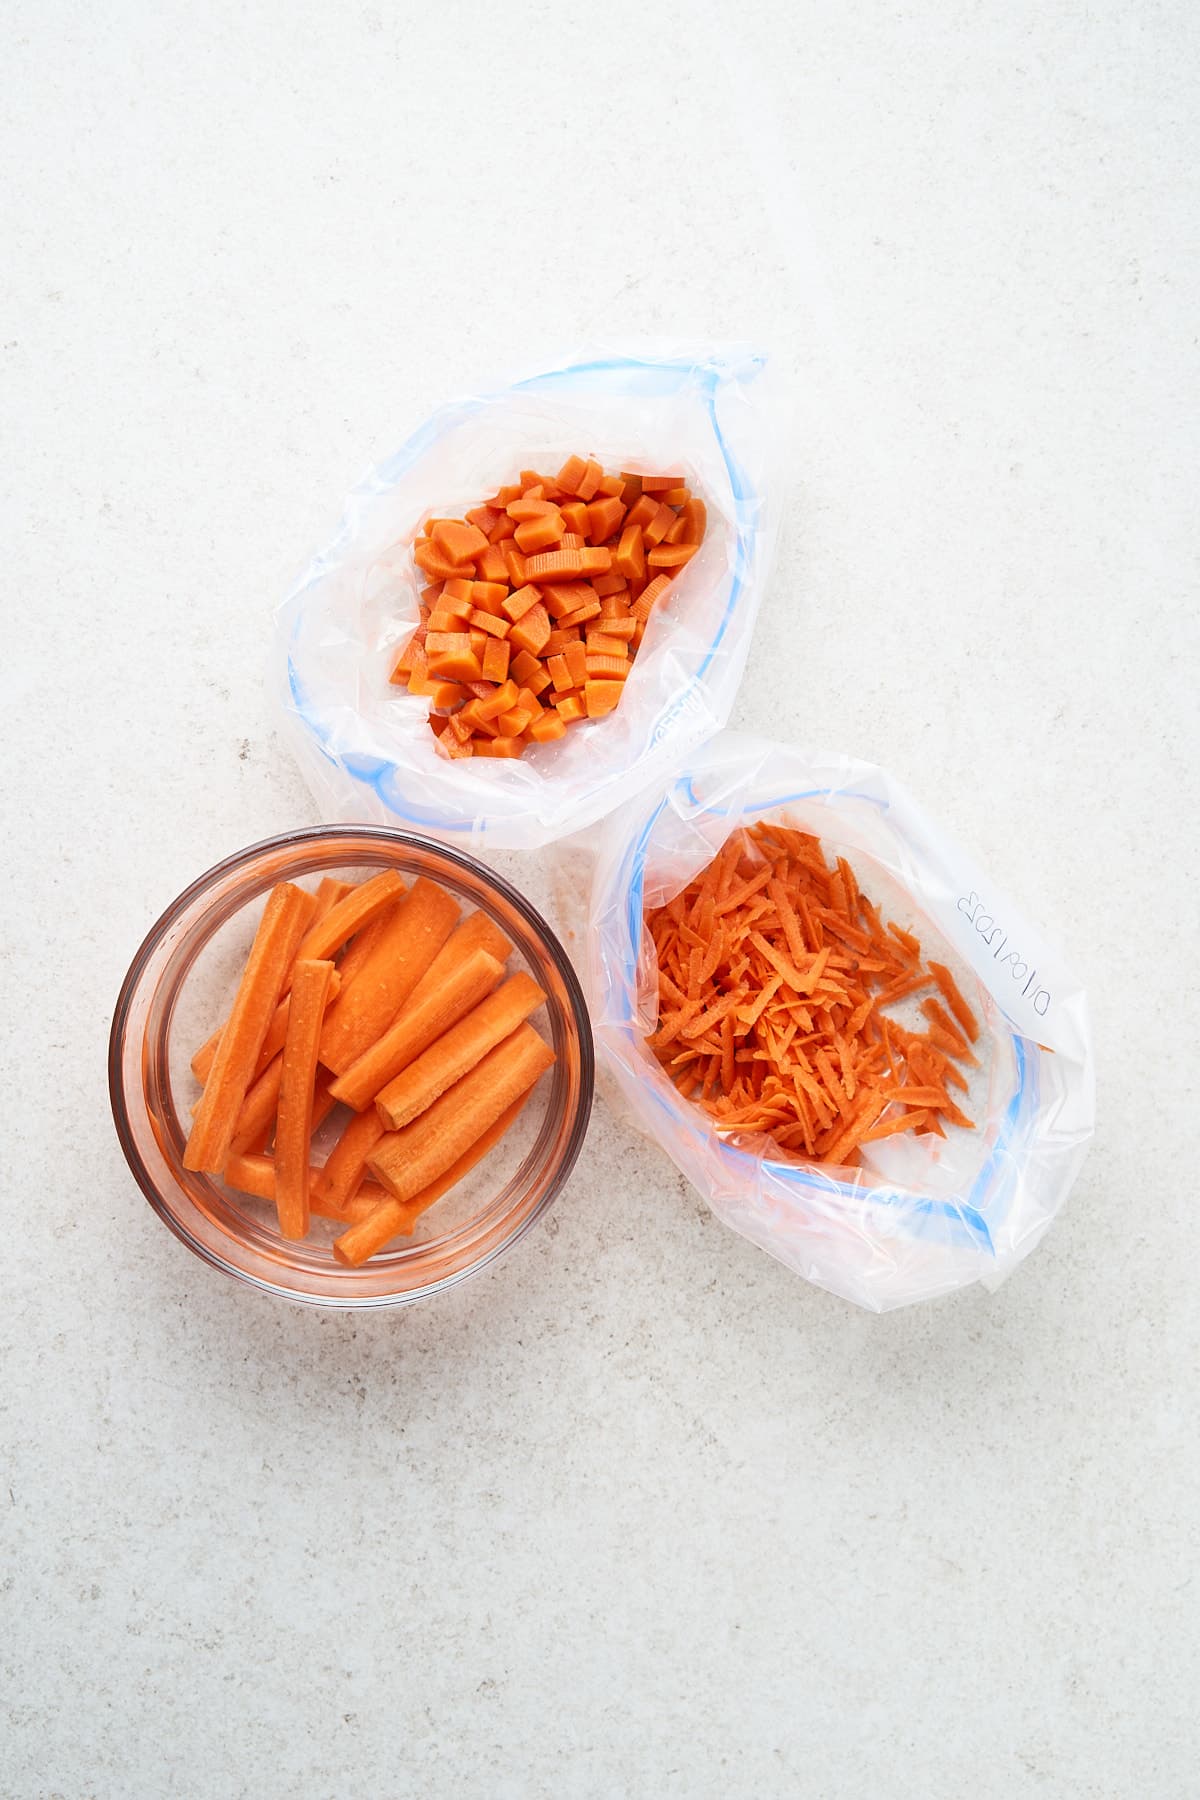 How to store carrots.